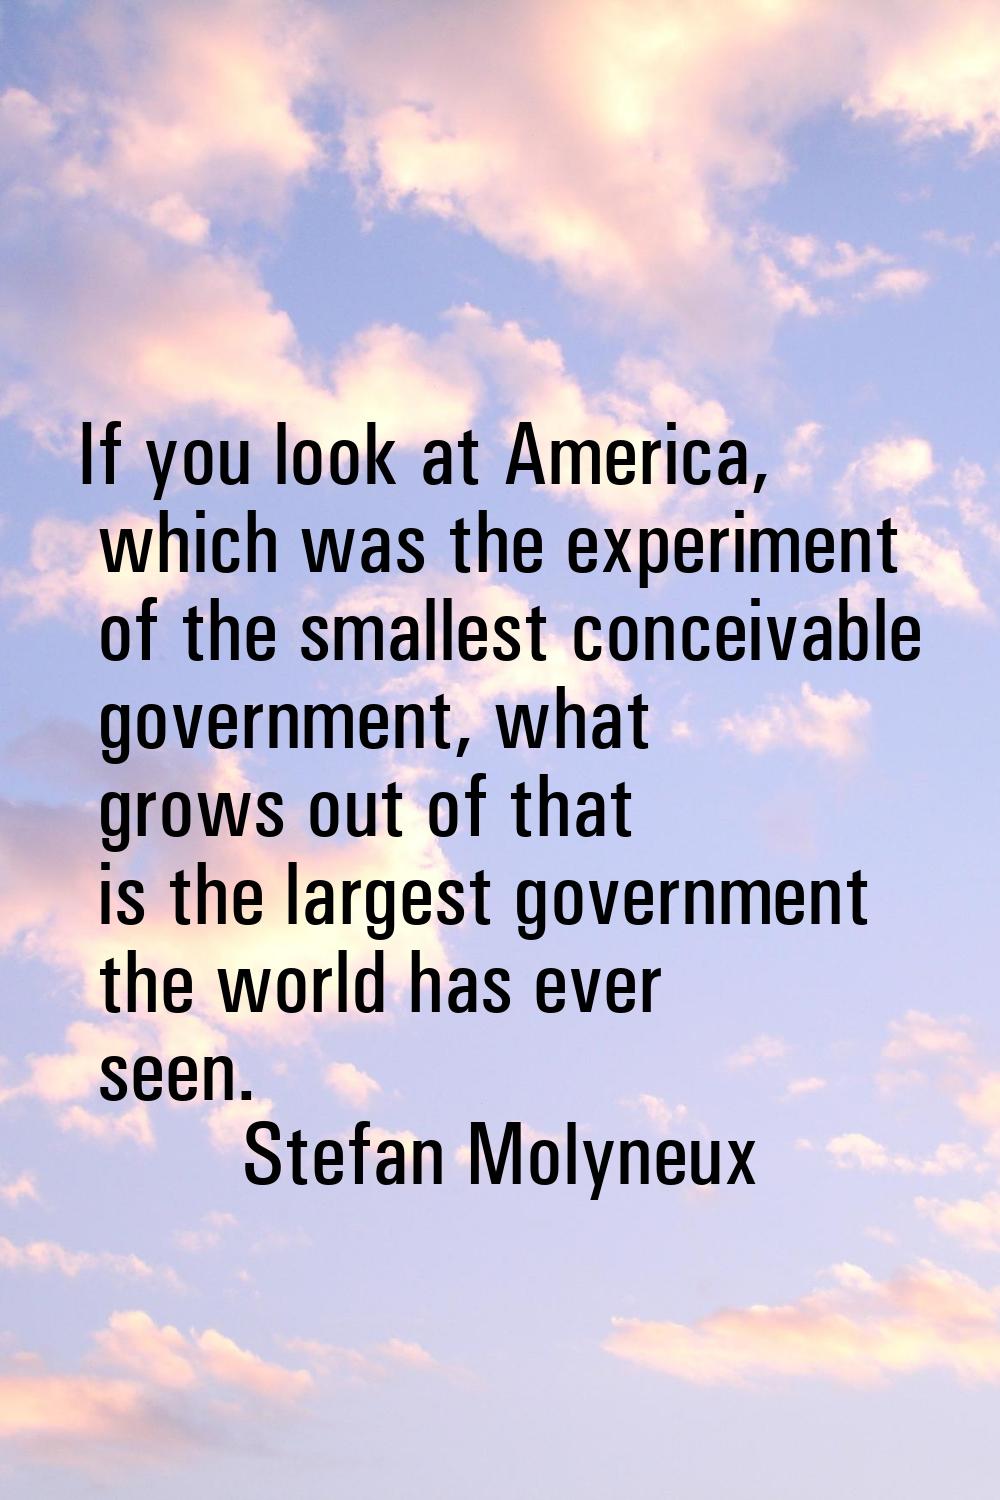 If you look at America, which was the experiment of the smallest conceivable government, what grows